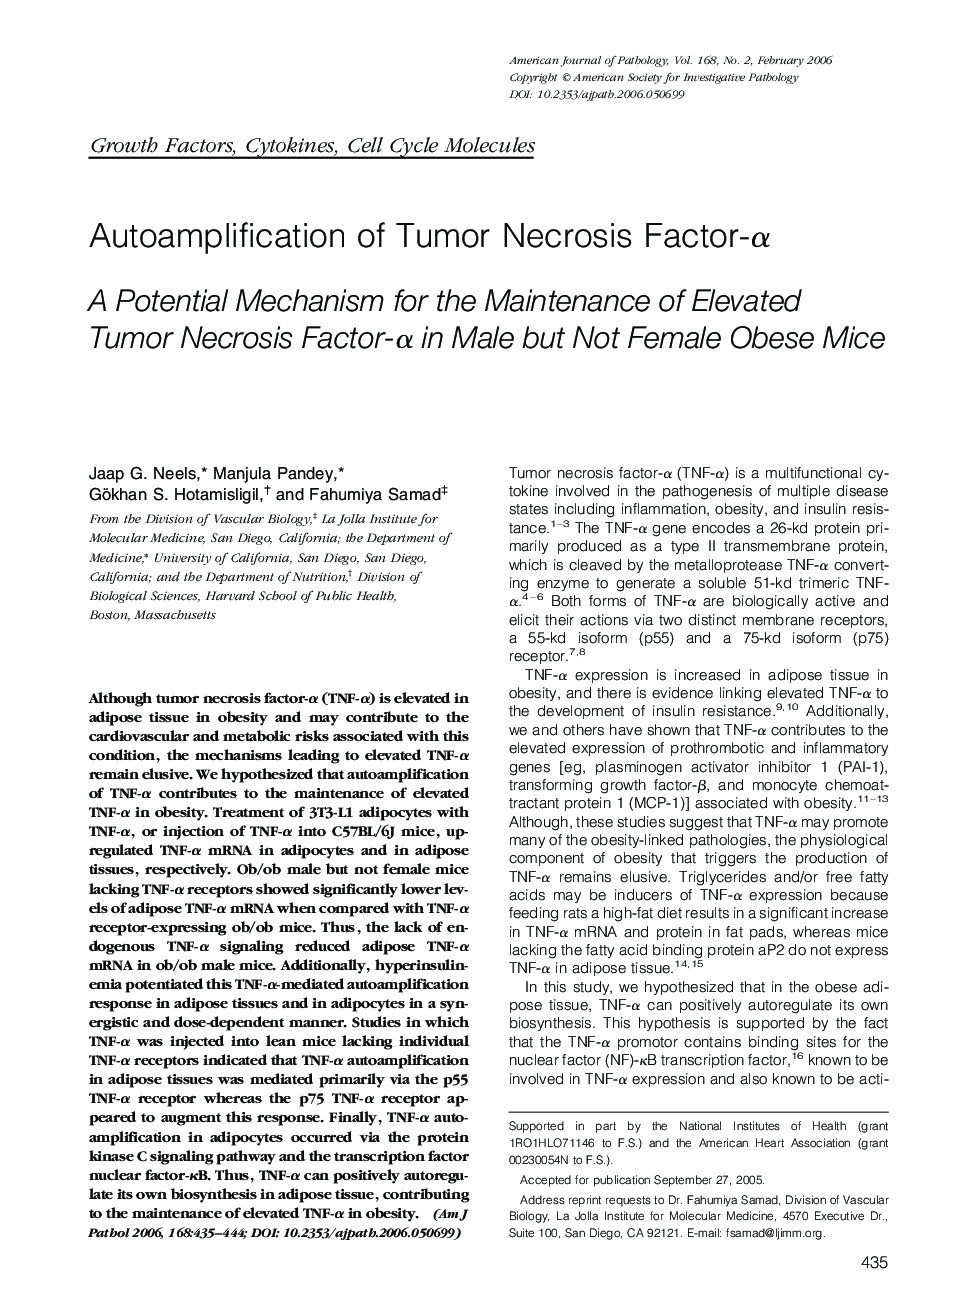 Regular ArticlesAutoamplification of Tumor Necrosis Factor-Î±: A Potential Mechanism for the Maintenance of Elevated Tumor Necrosis Factor-Î± in Male but Not Female Obese Mice